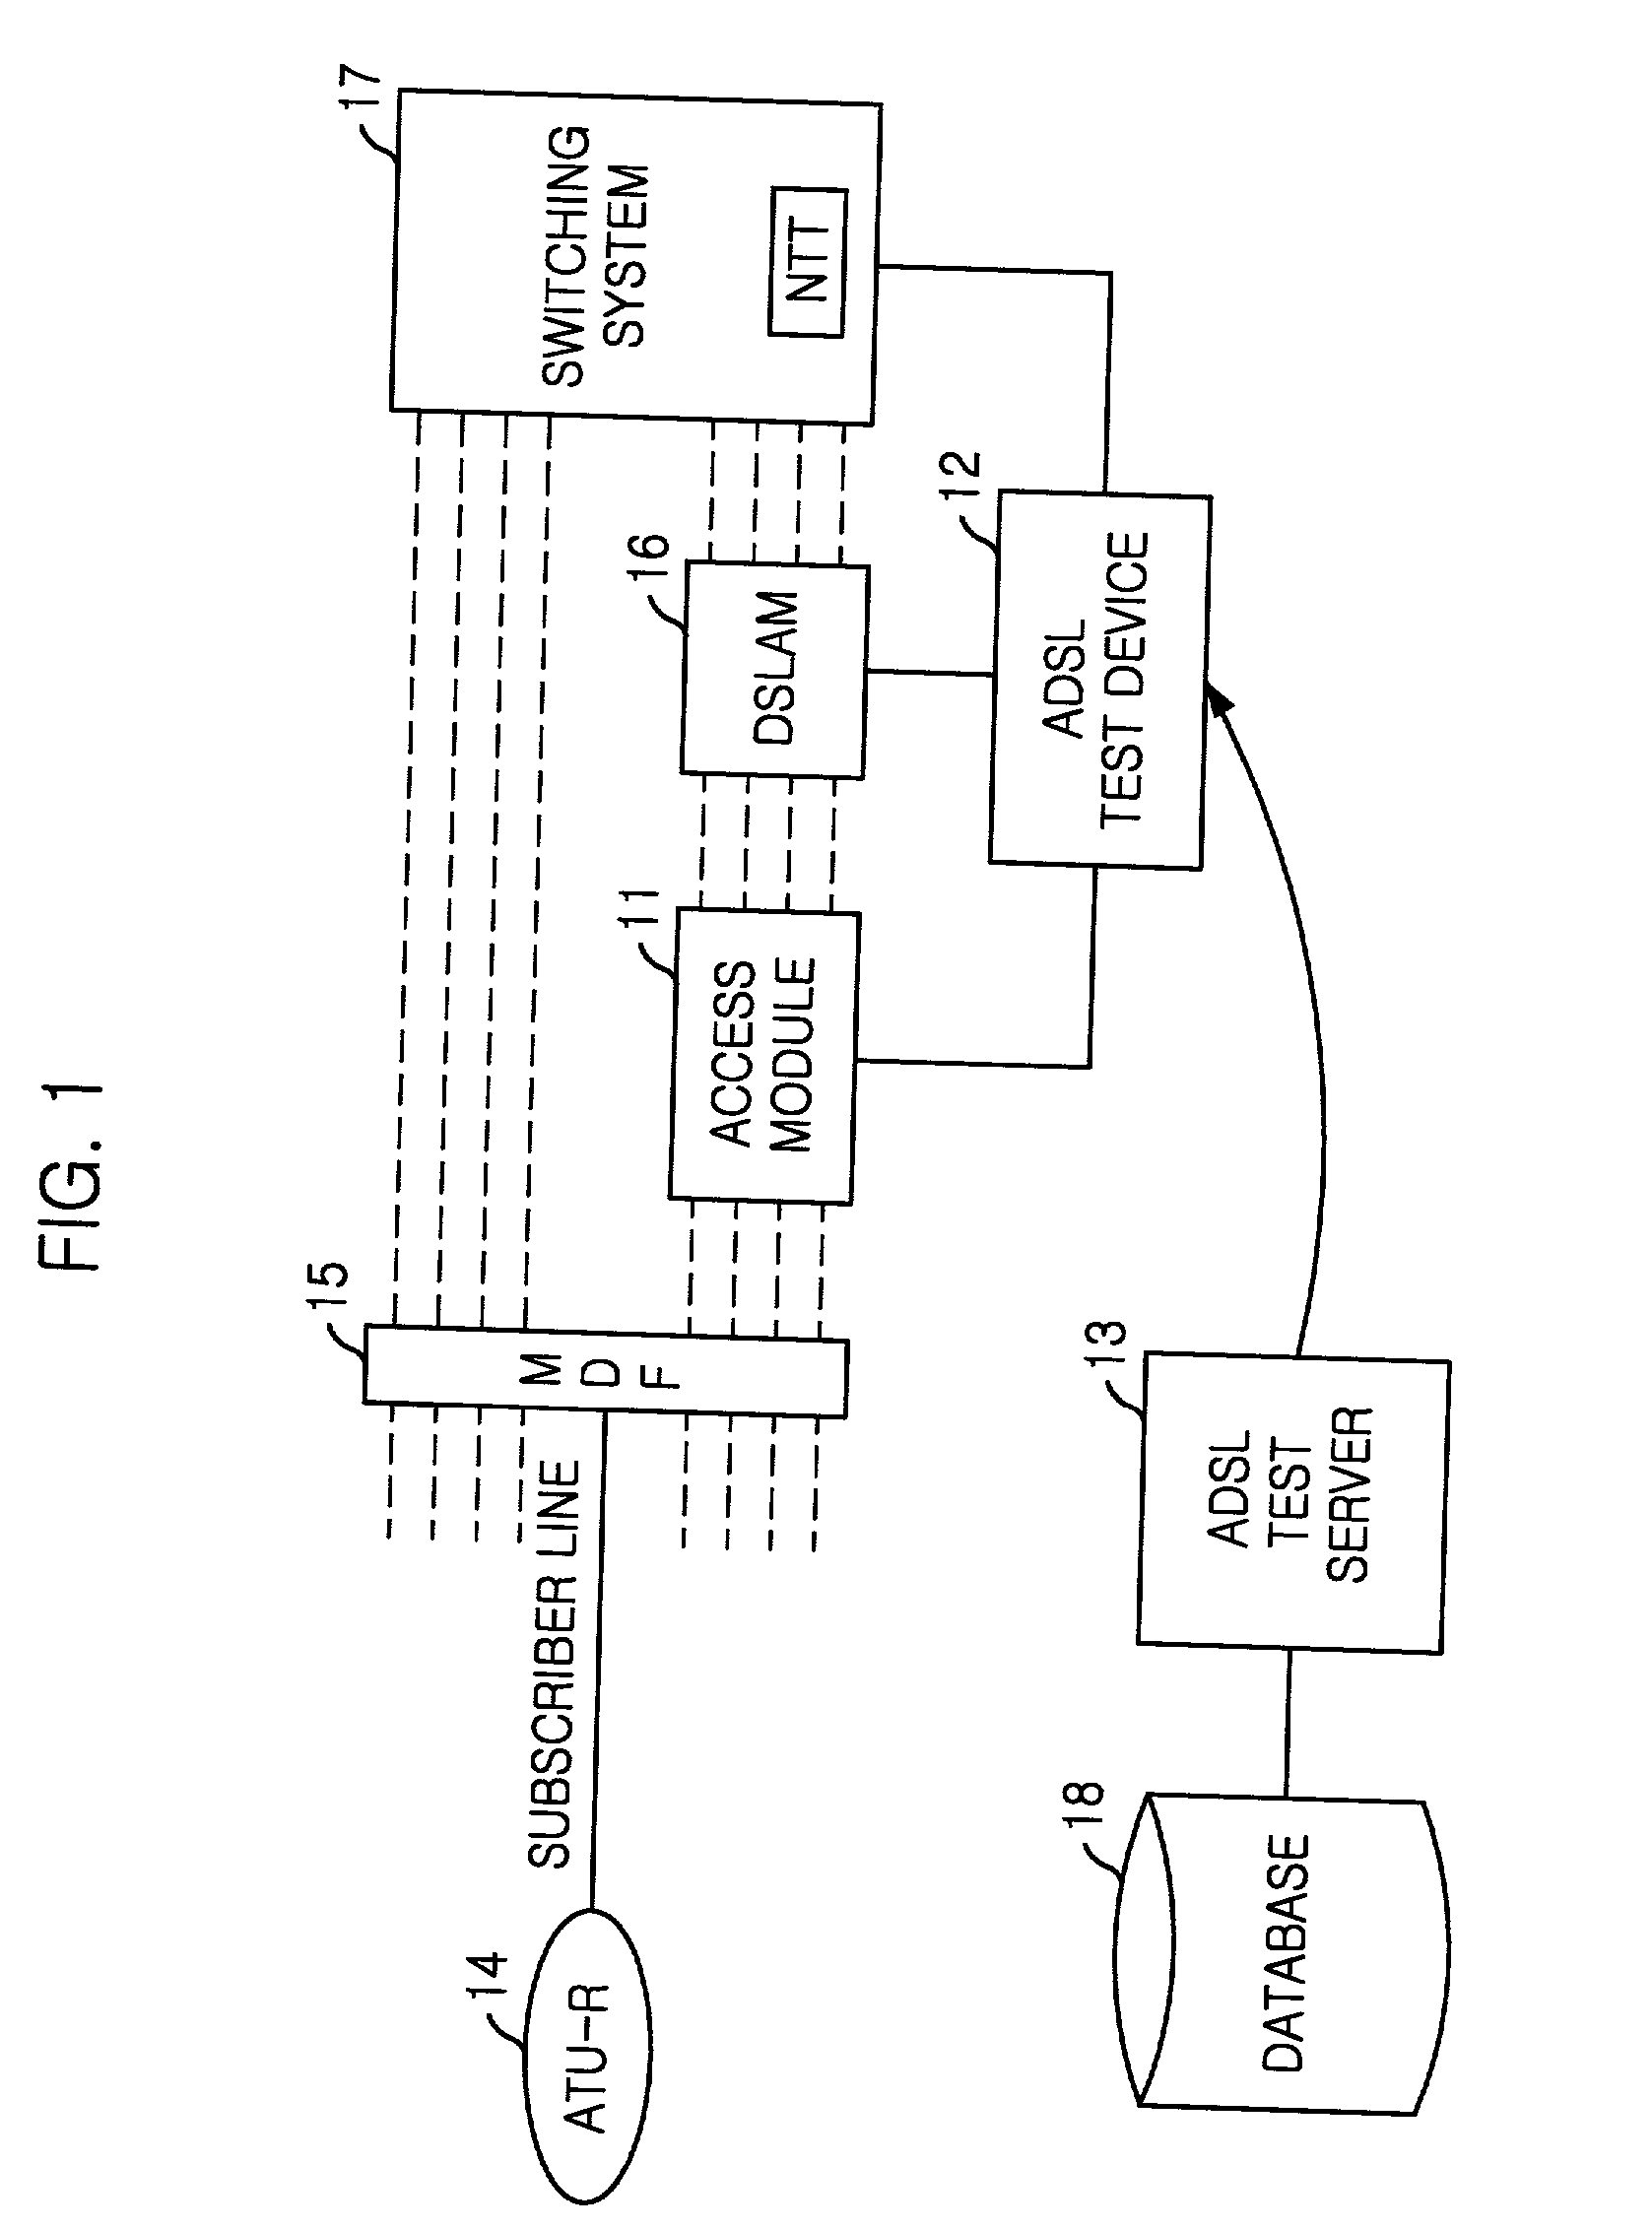 System for diagnosing failures of asymmetric digital subscriber line and method therefor